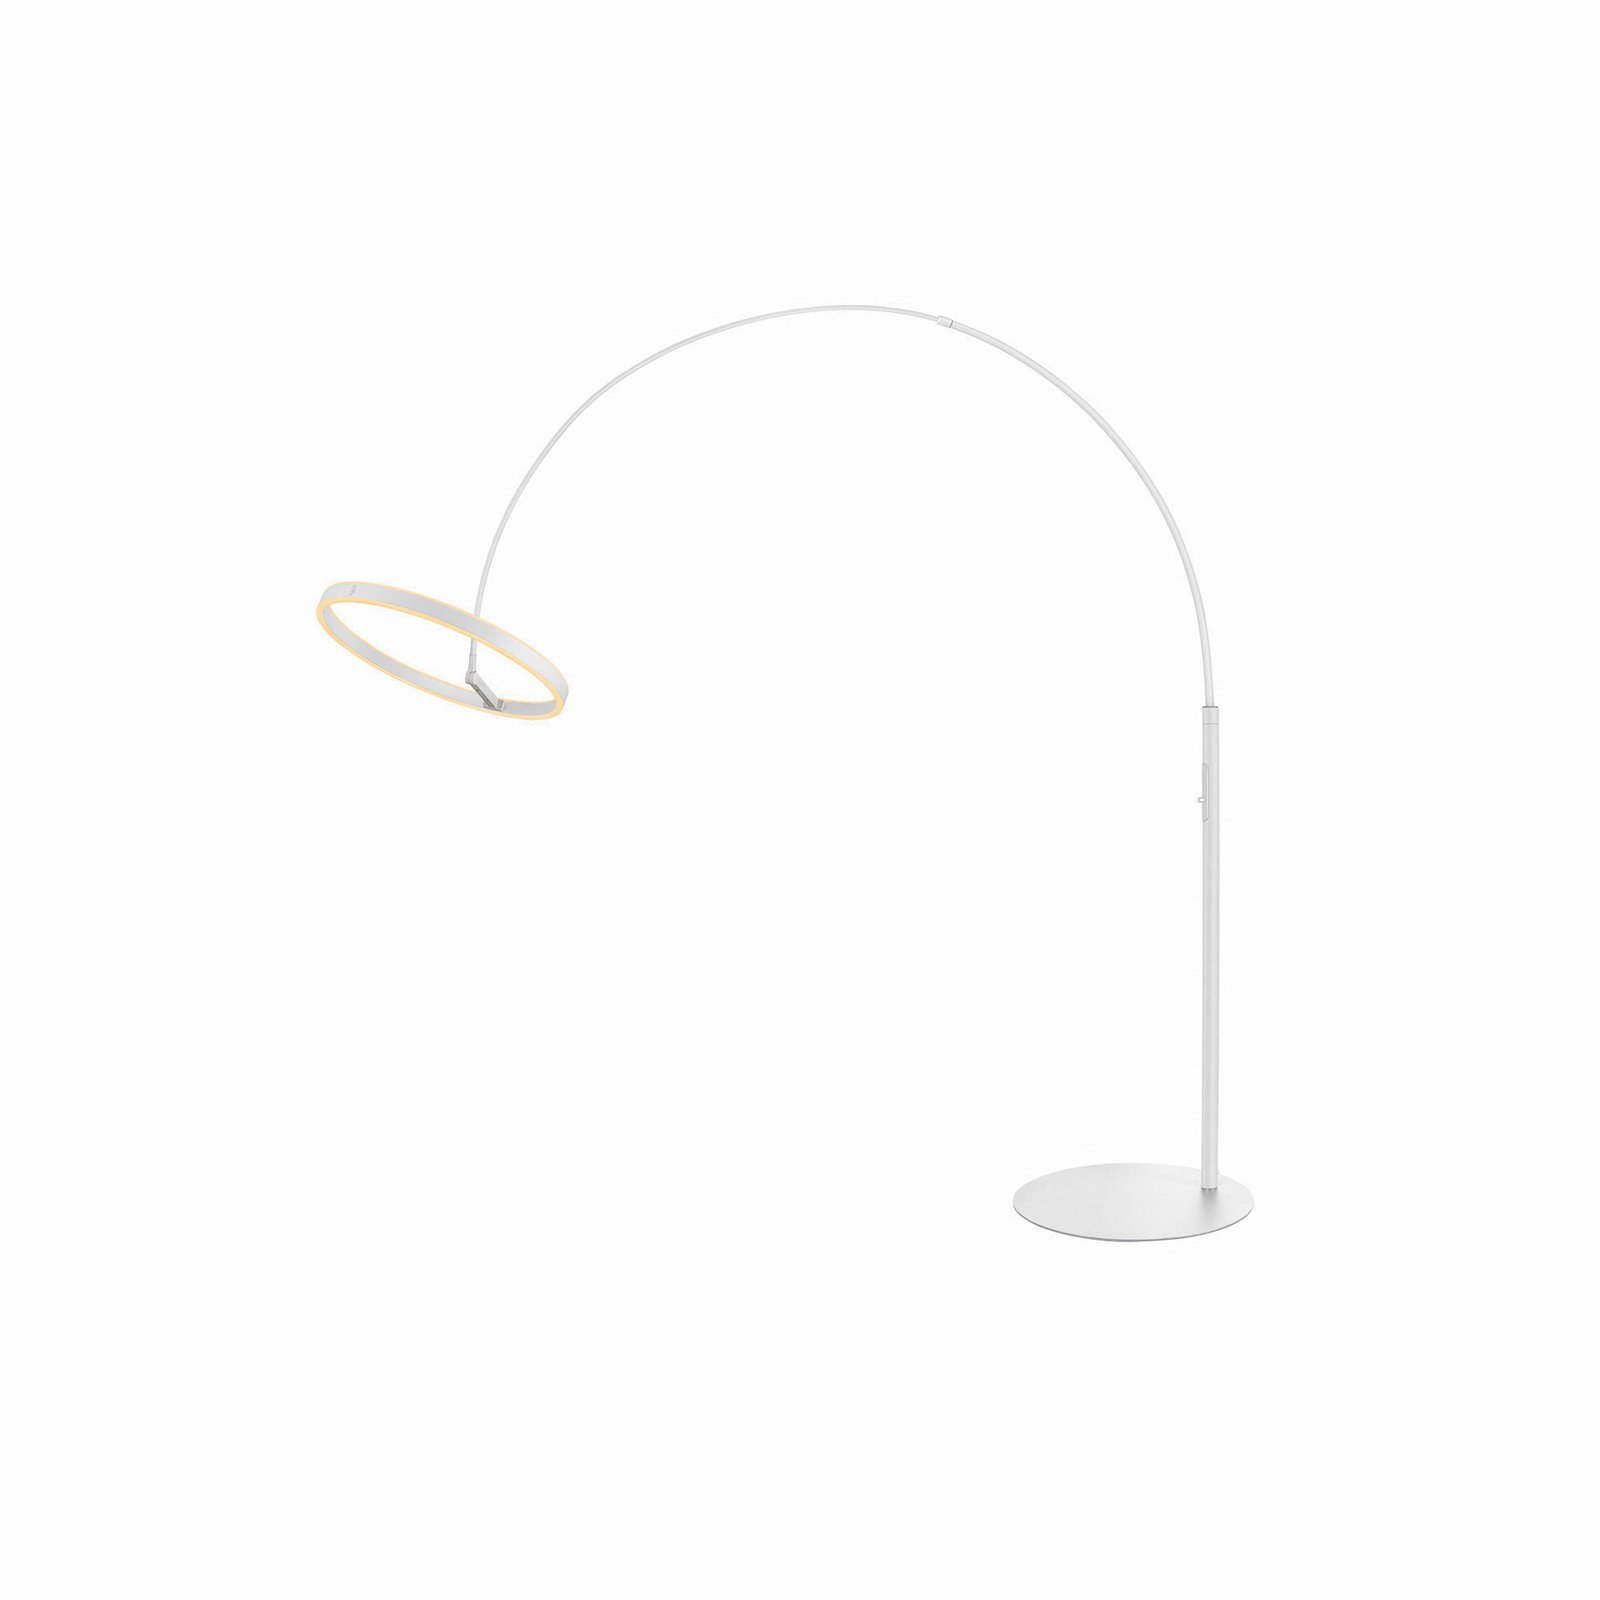 LED vloerlamp One Bow FL, wit, staal, hoogte 232 cm, CCT